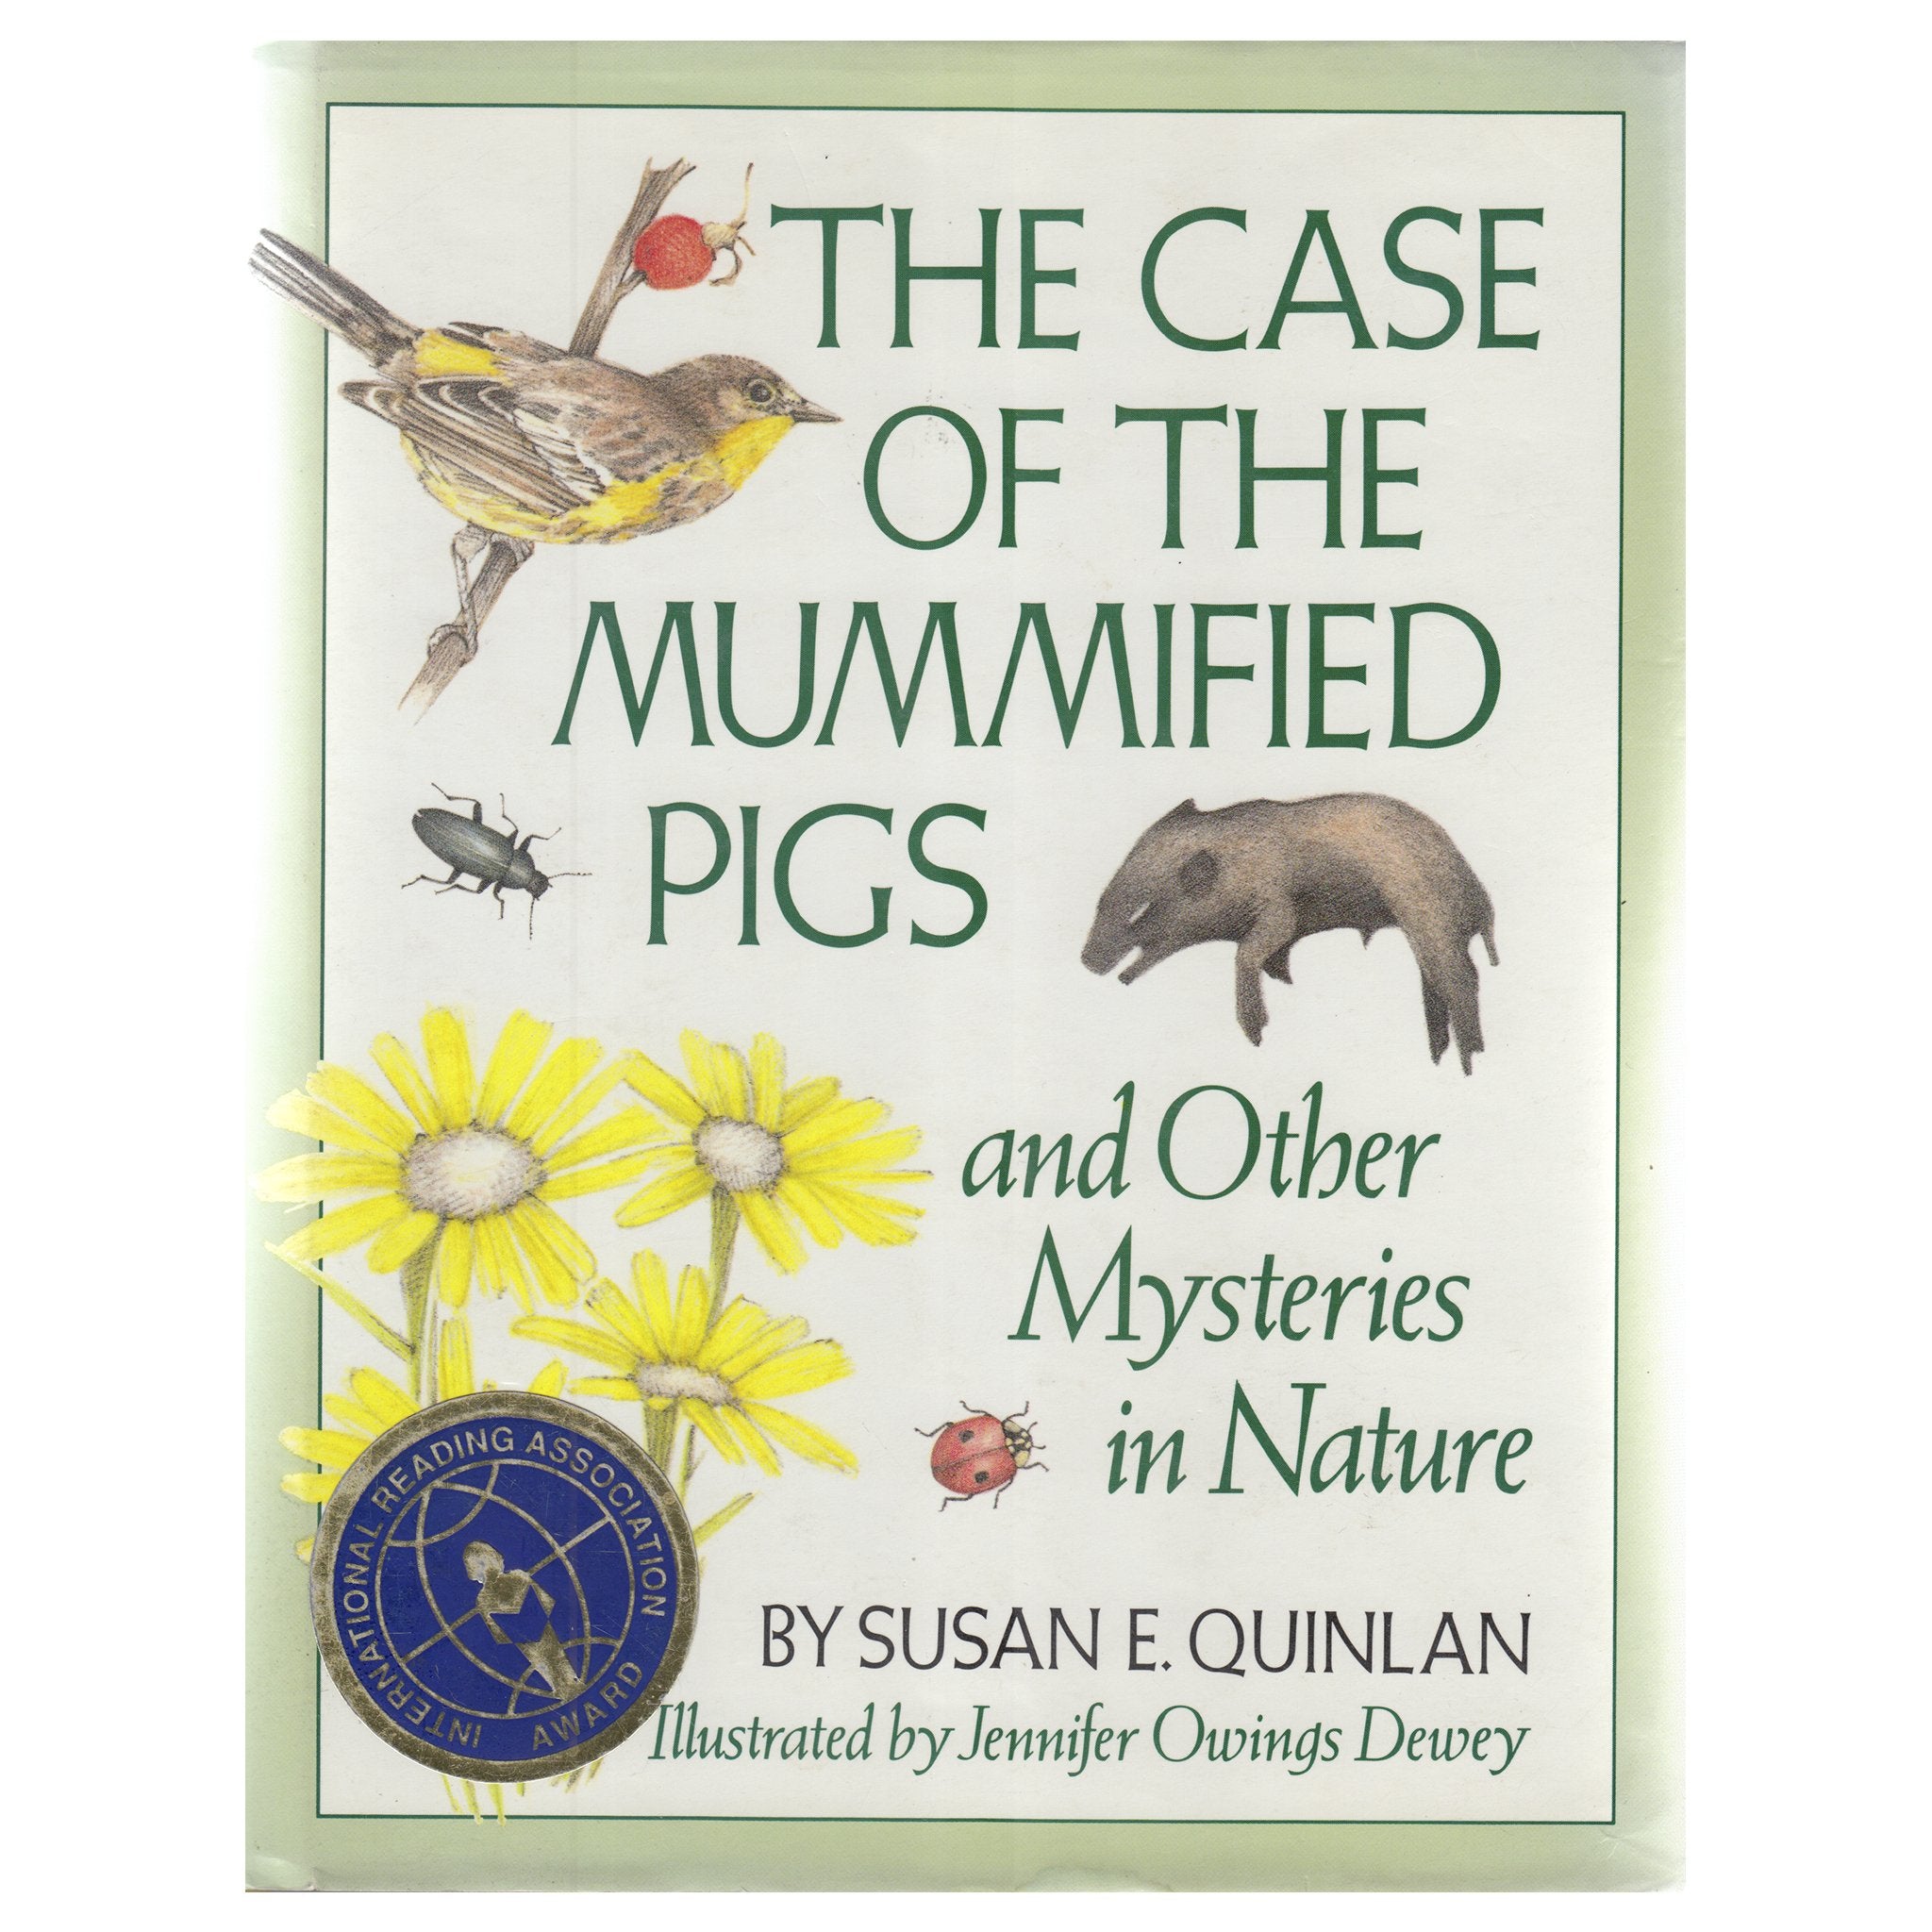 The Case of the Mummified Pigs and Other Mysteries in Nature